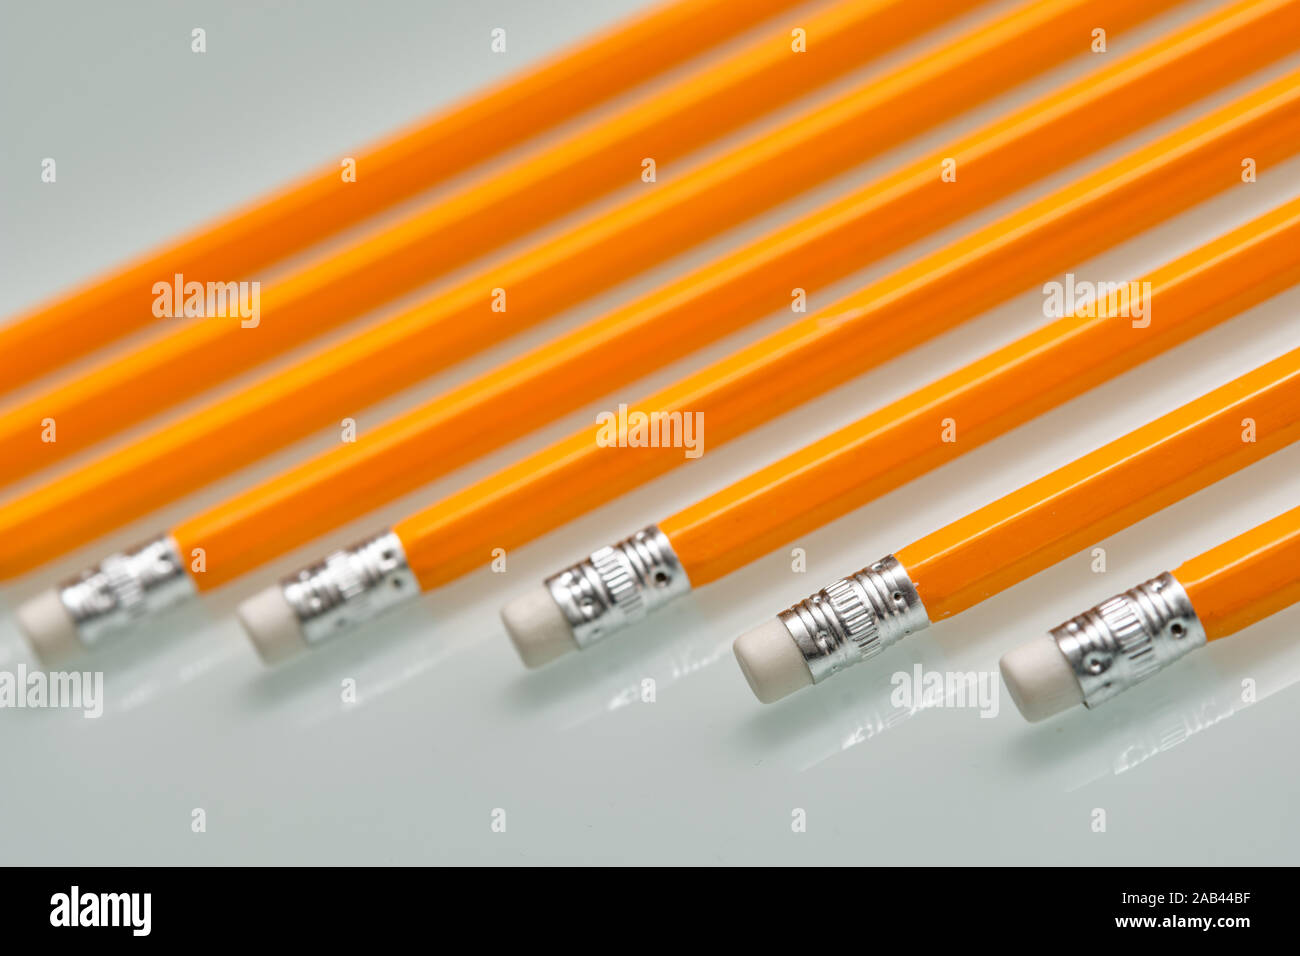 Background with a pattern consisting of a closeup of a row of orange lead pencils with white rubbers on the end lying on a white glass plate. Stock Photo